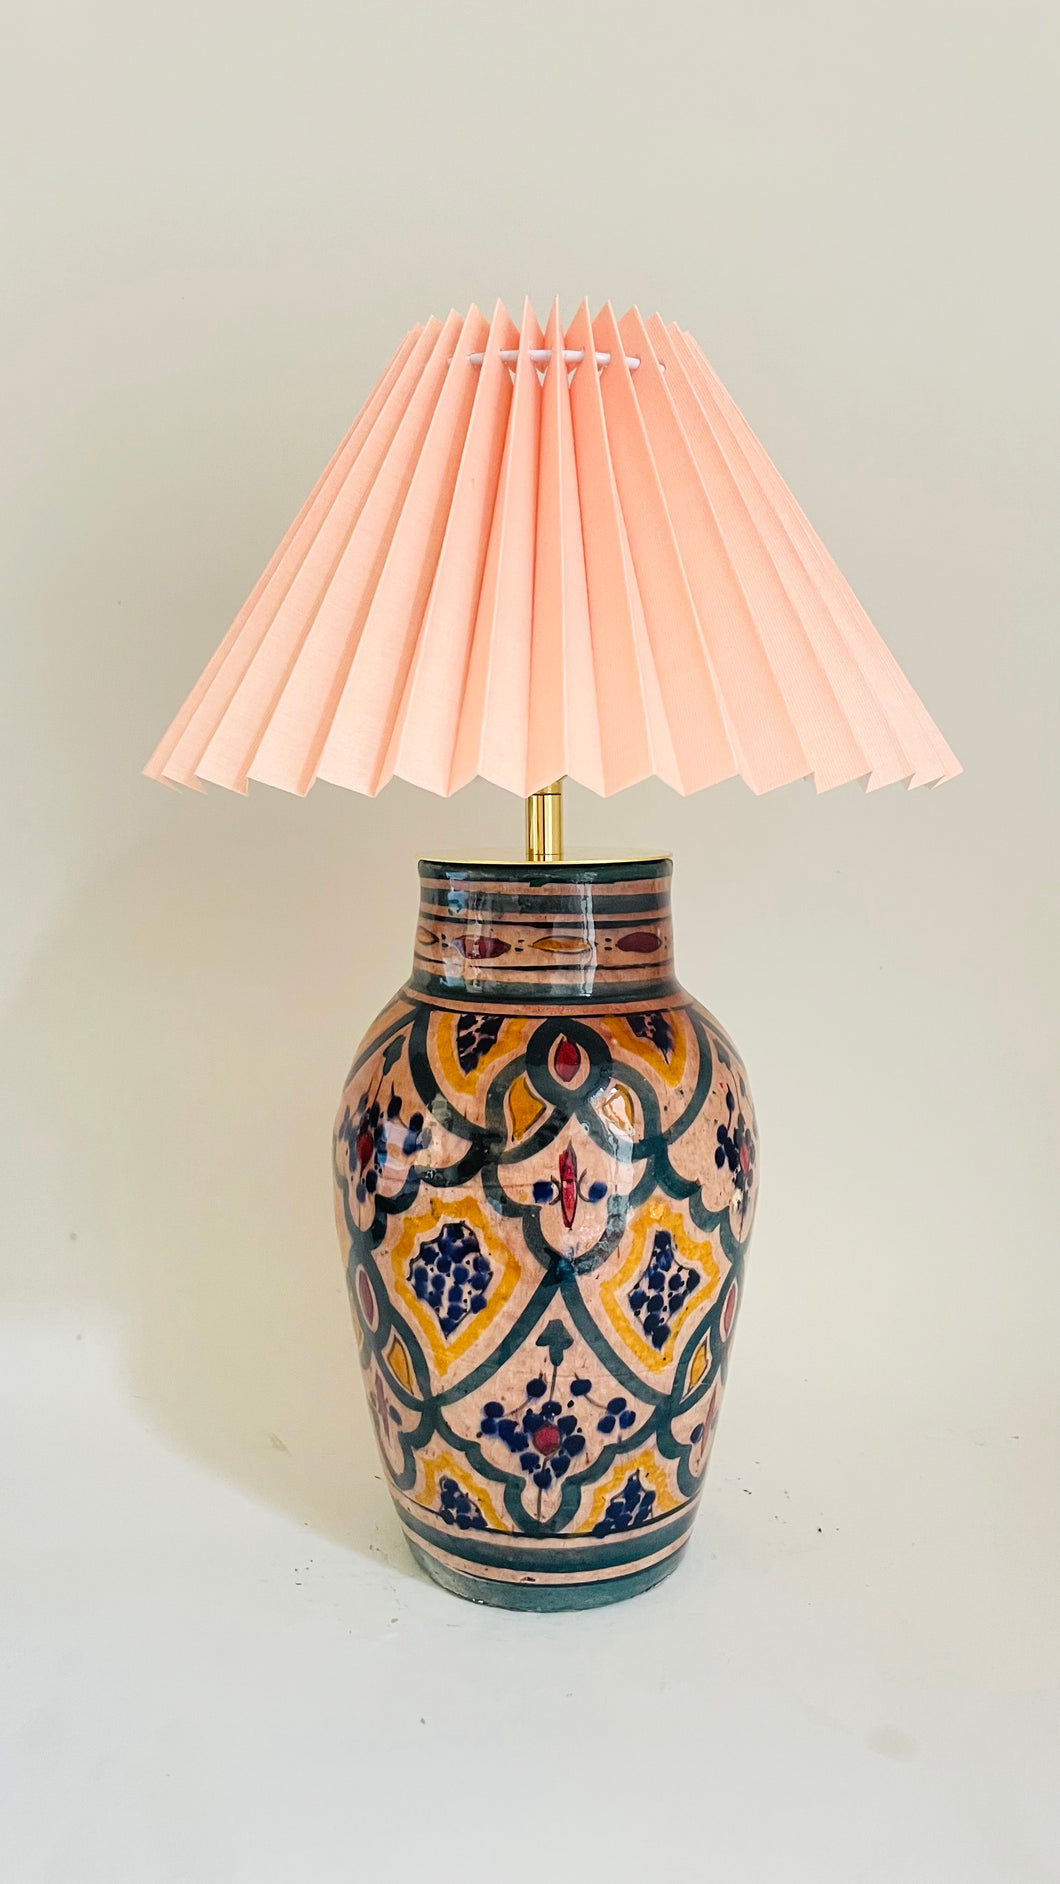 Moroccan Table Lamp - pre order for mid Oct